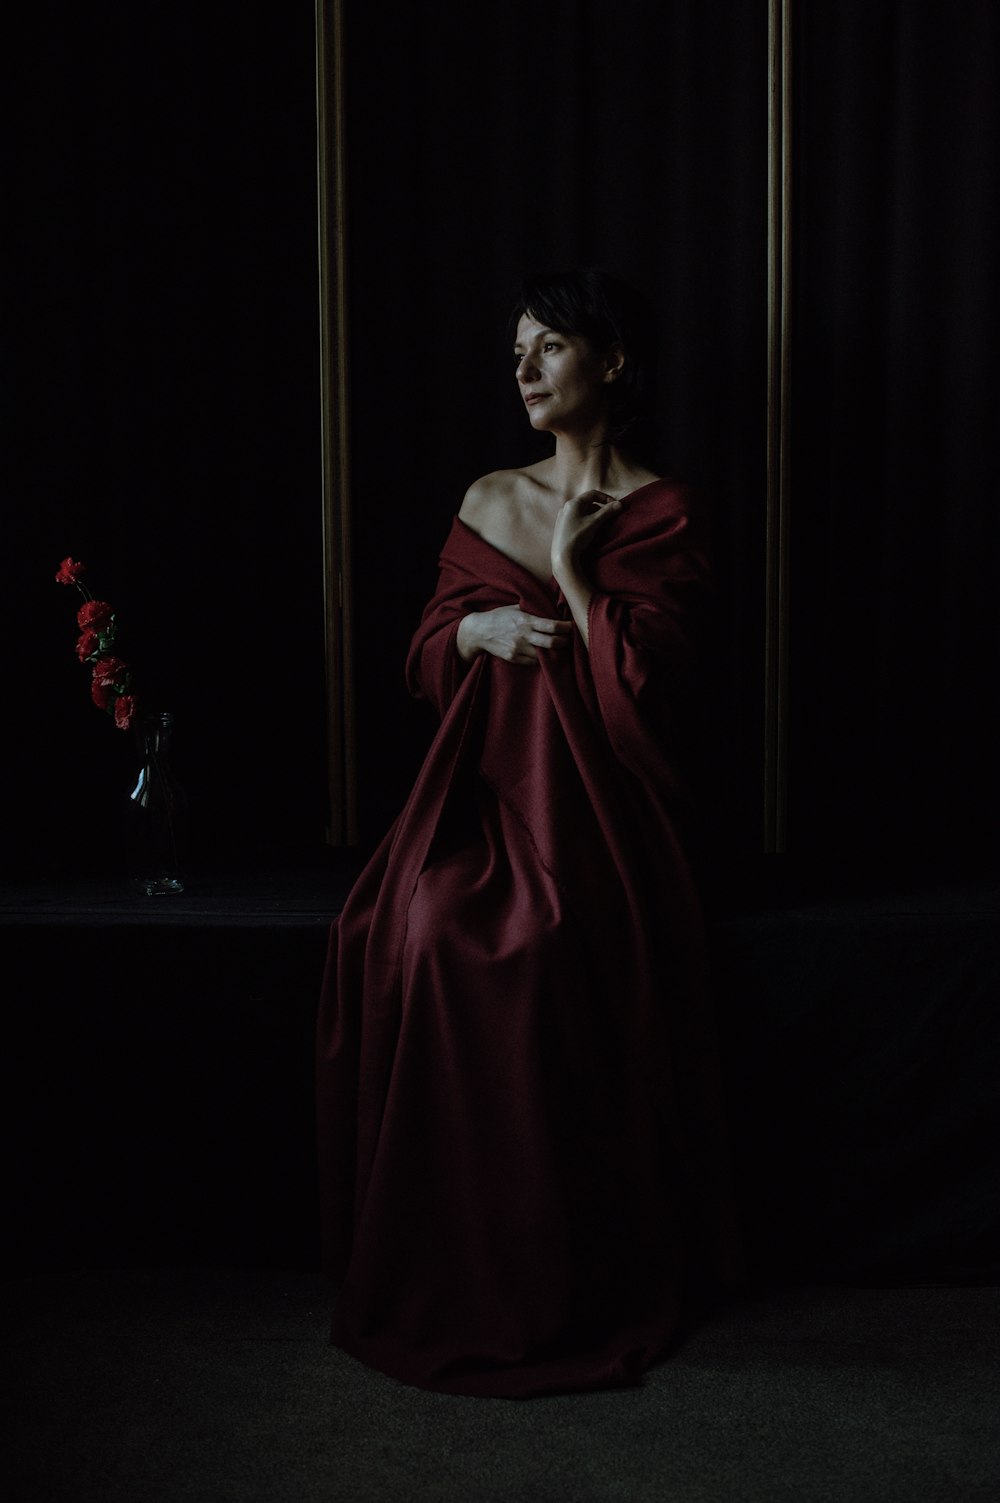 a woman in a red dress standing in a dark room